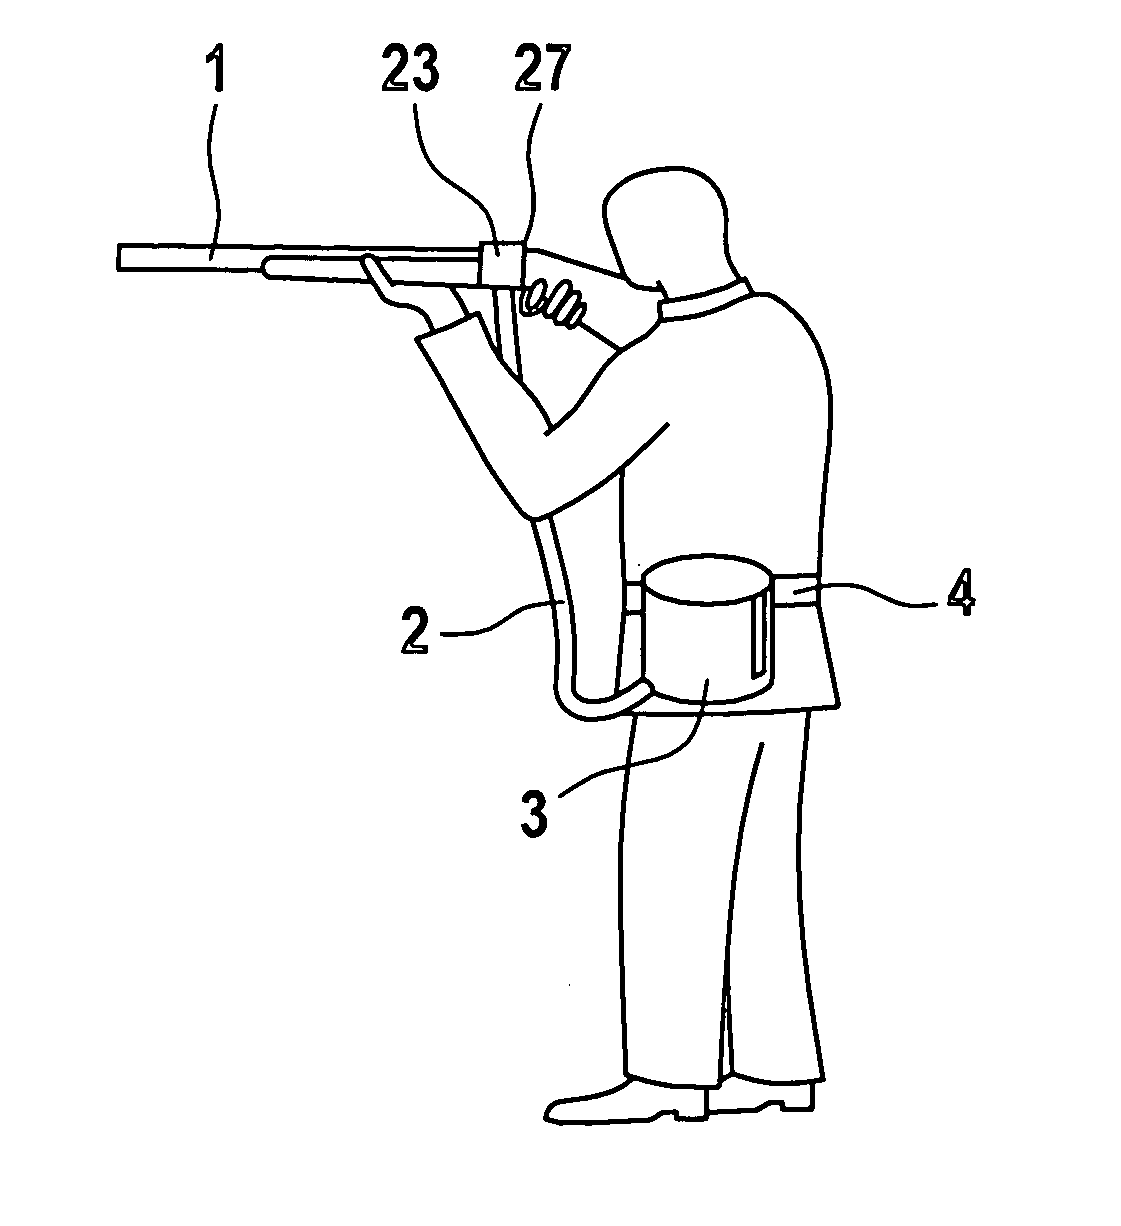 Device for storing projectile balls and feeding them into the projectile chamber of a gun